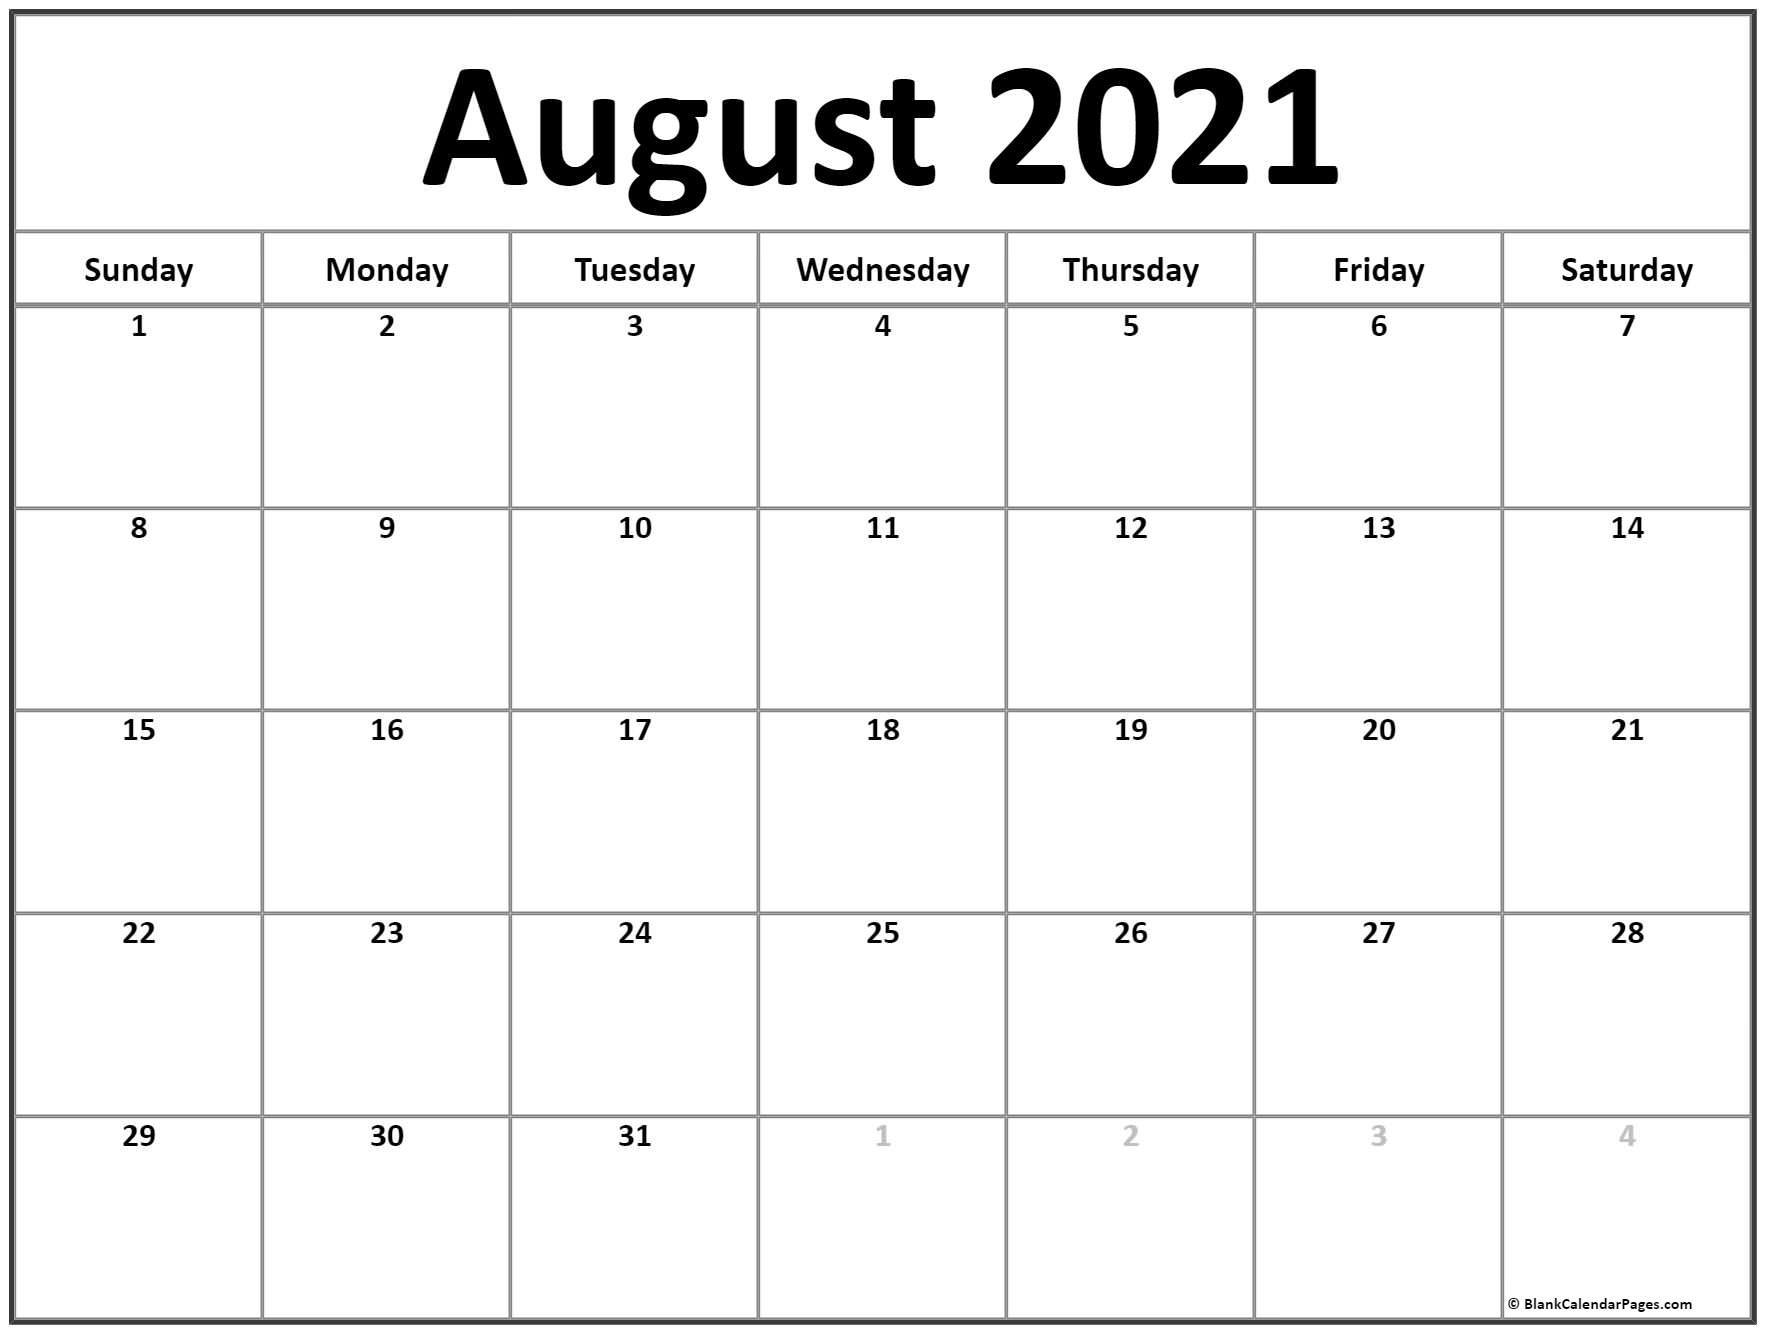 August 2021 Calendar | Free Printable Calendar Templates-Appointment Calendar For Month Of August 2021